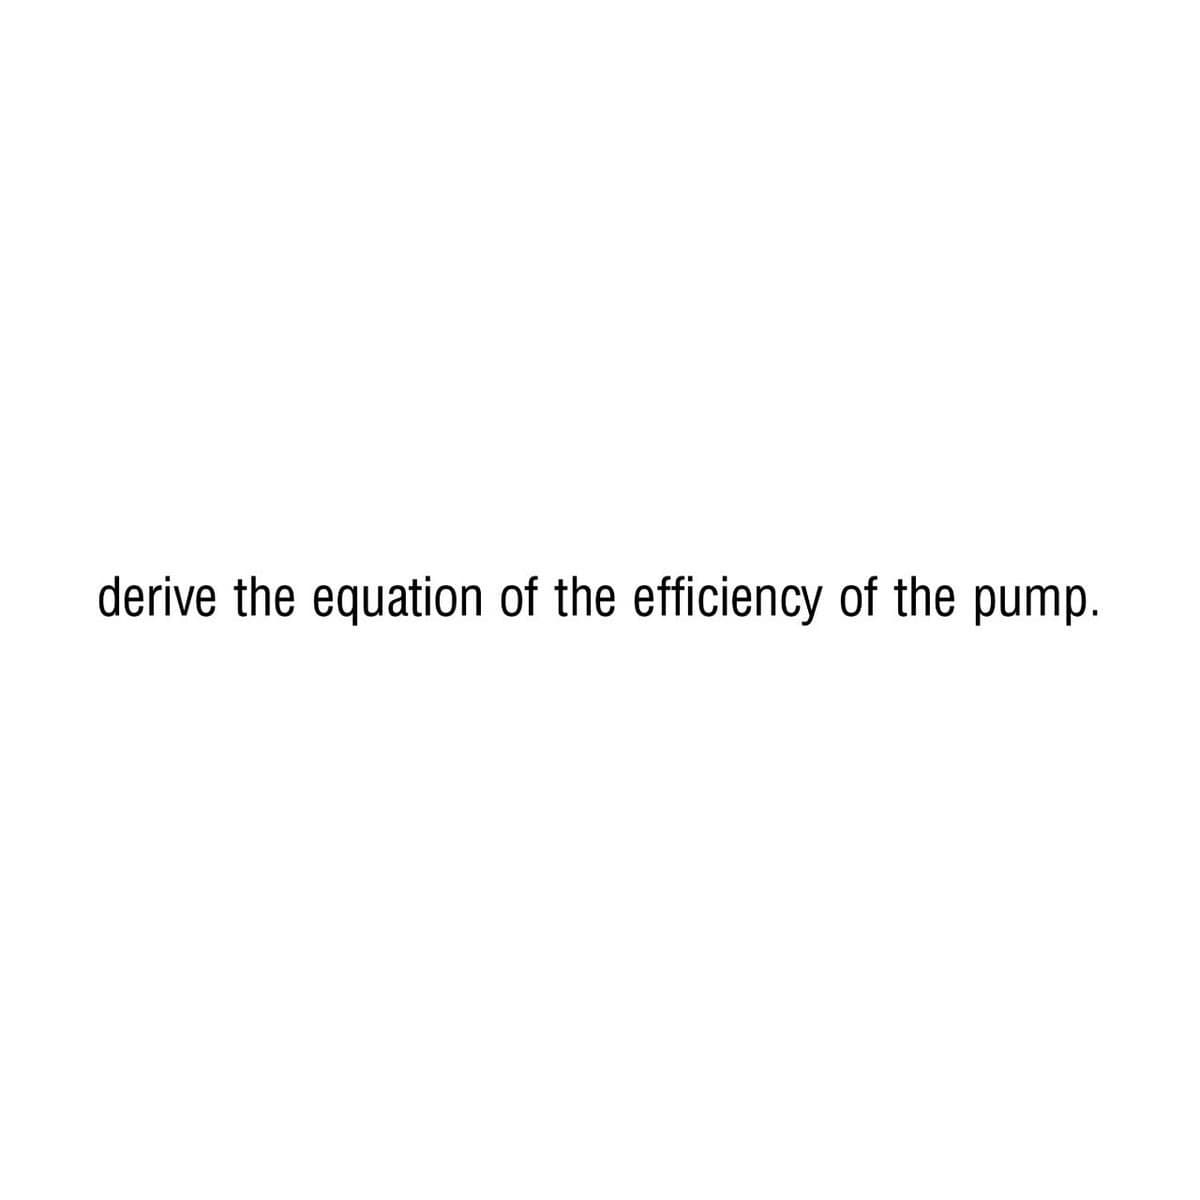 derive the equation of the efficiency of the pump.